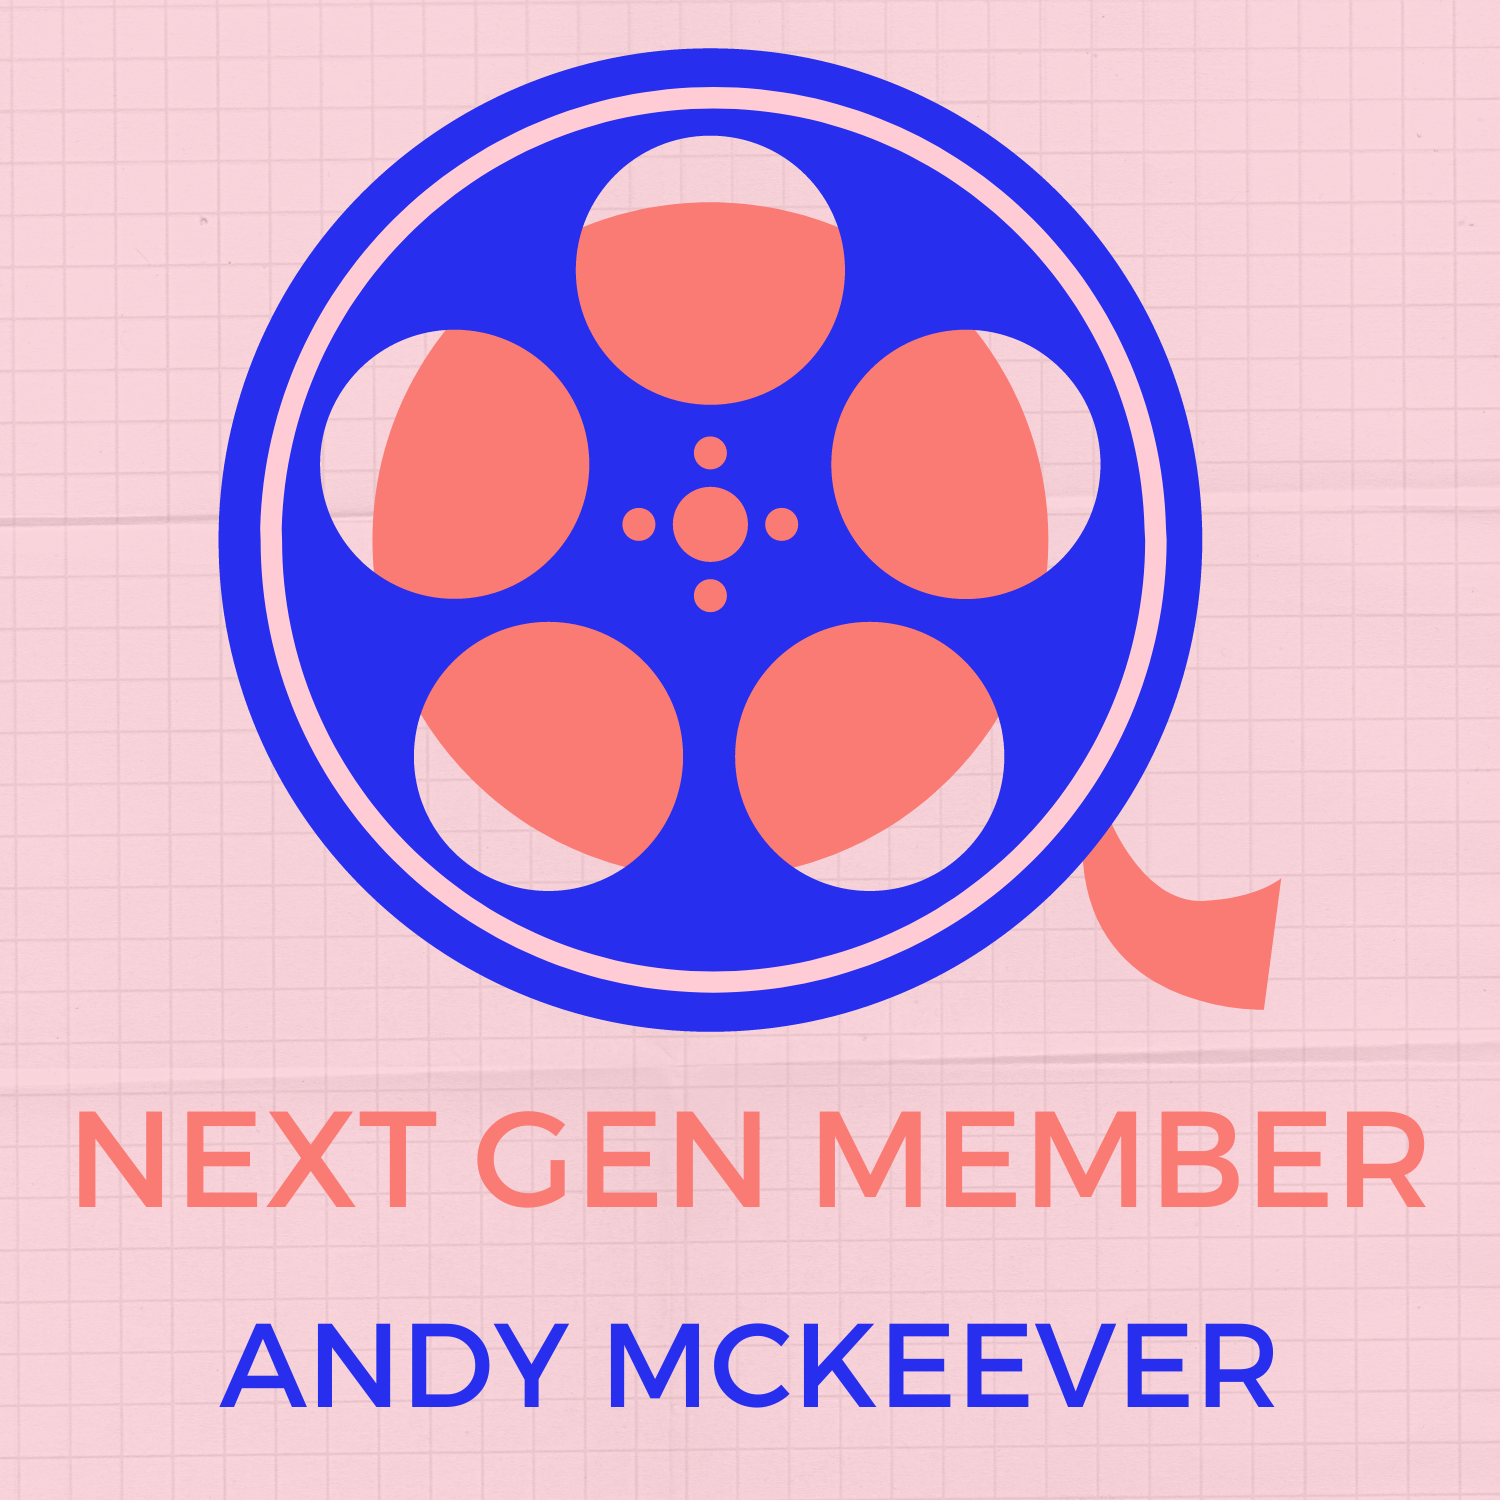 Andy McKeever